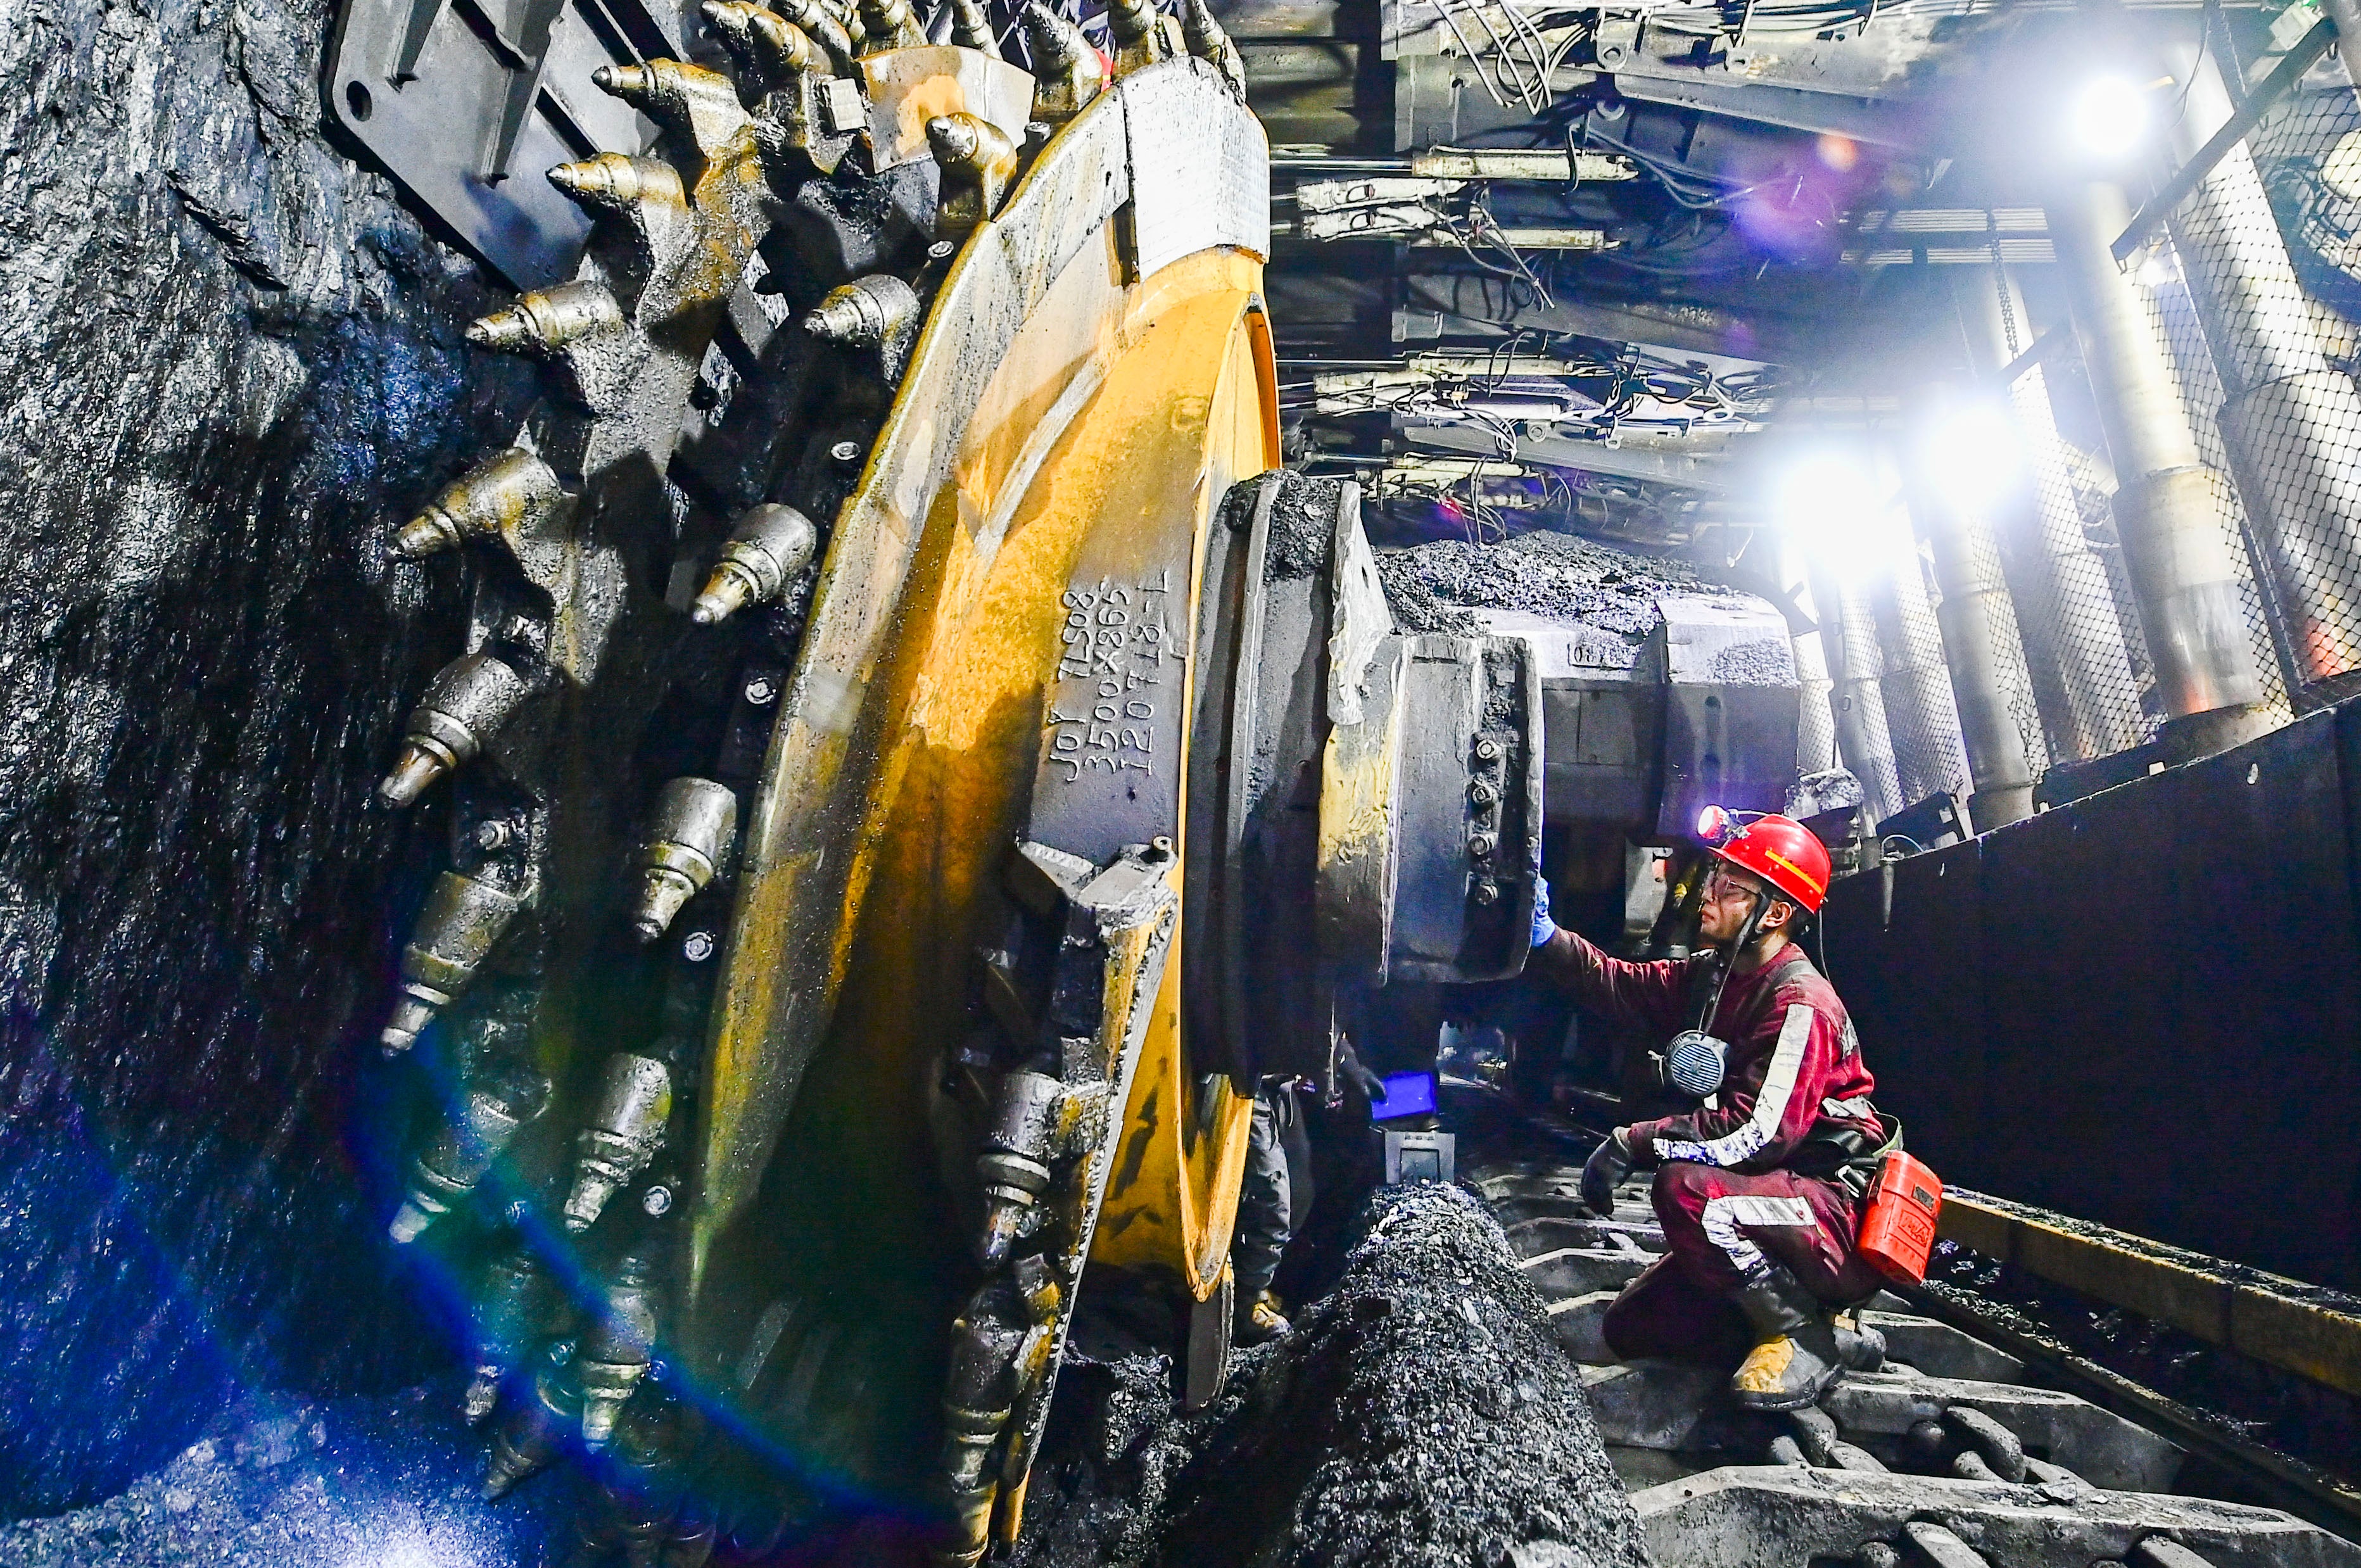 A worker checks equipment at a coal mine in Ordos, Inner Mongolia, China. Reducing demand for coal is crucial for meeting climate targets, say scientists